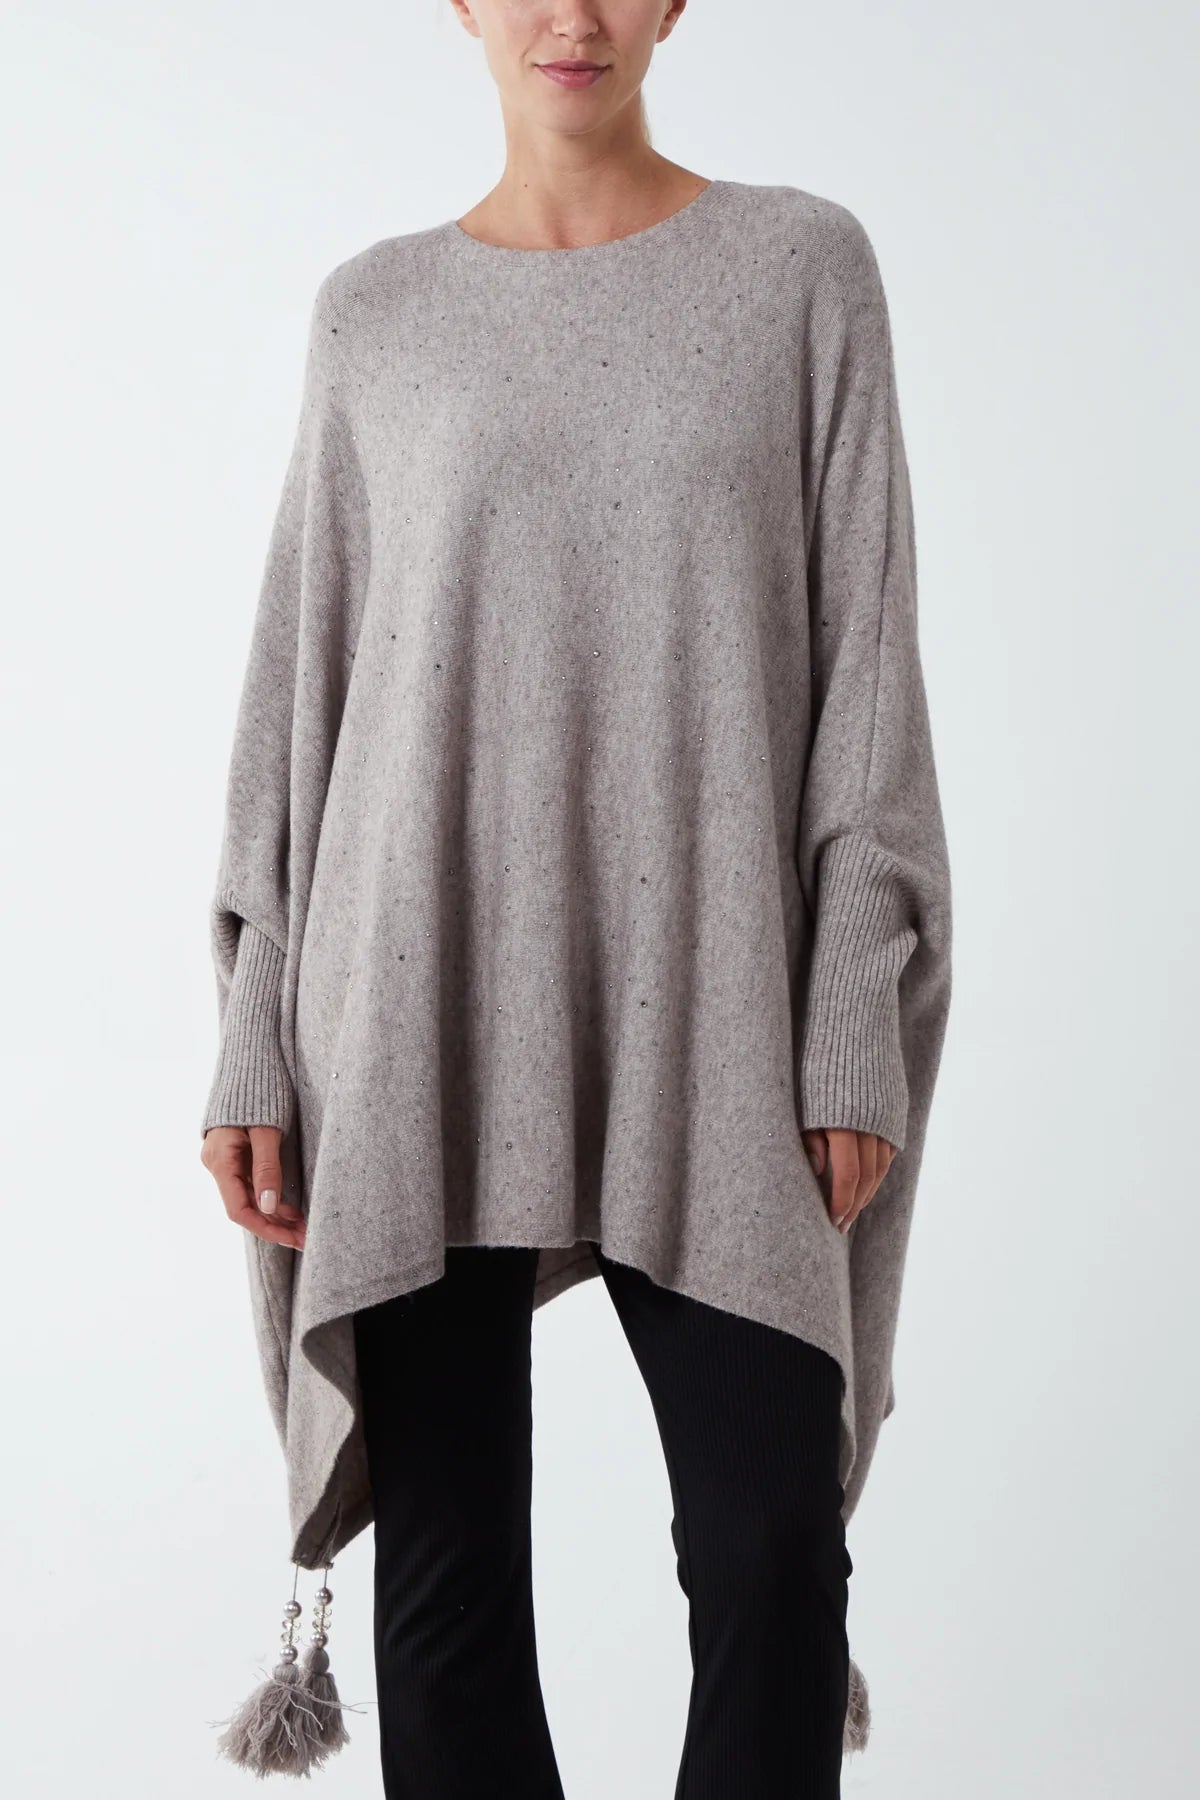 THE ESSENTIAL EDIT ITALIAN PONCHO - TAUPE